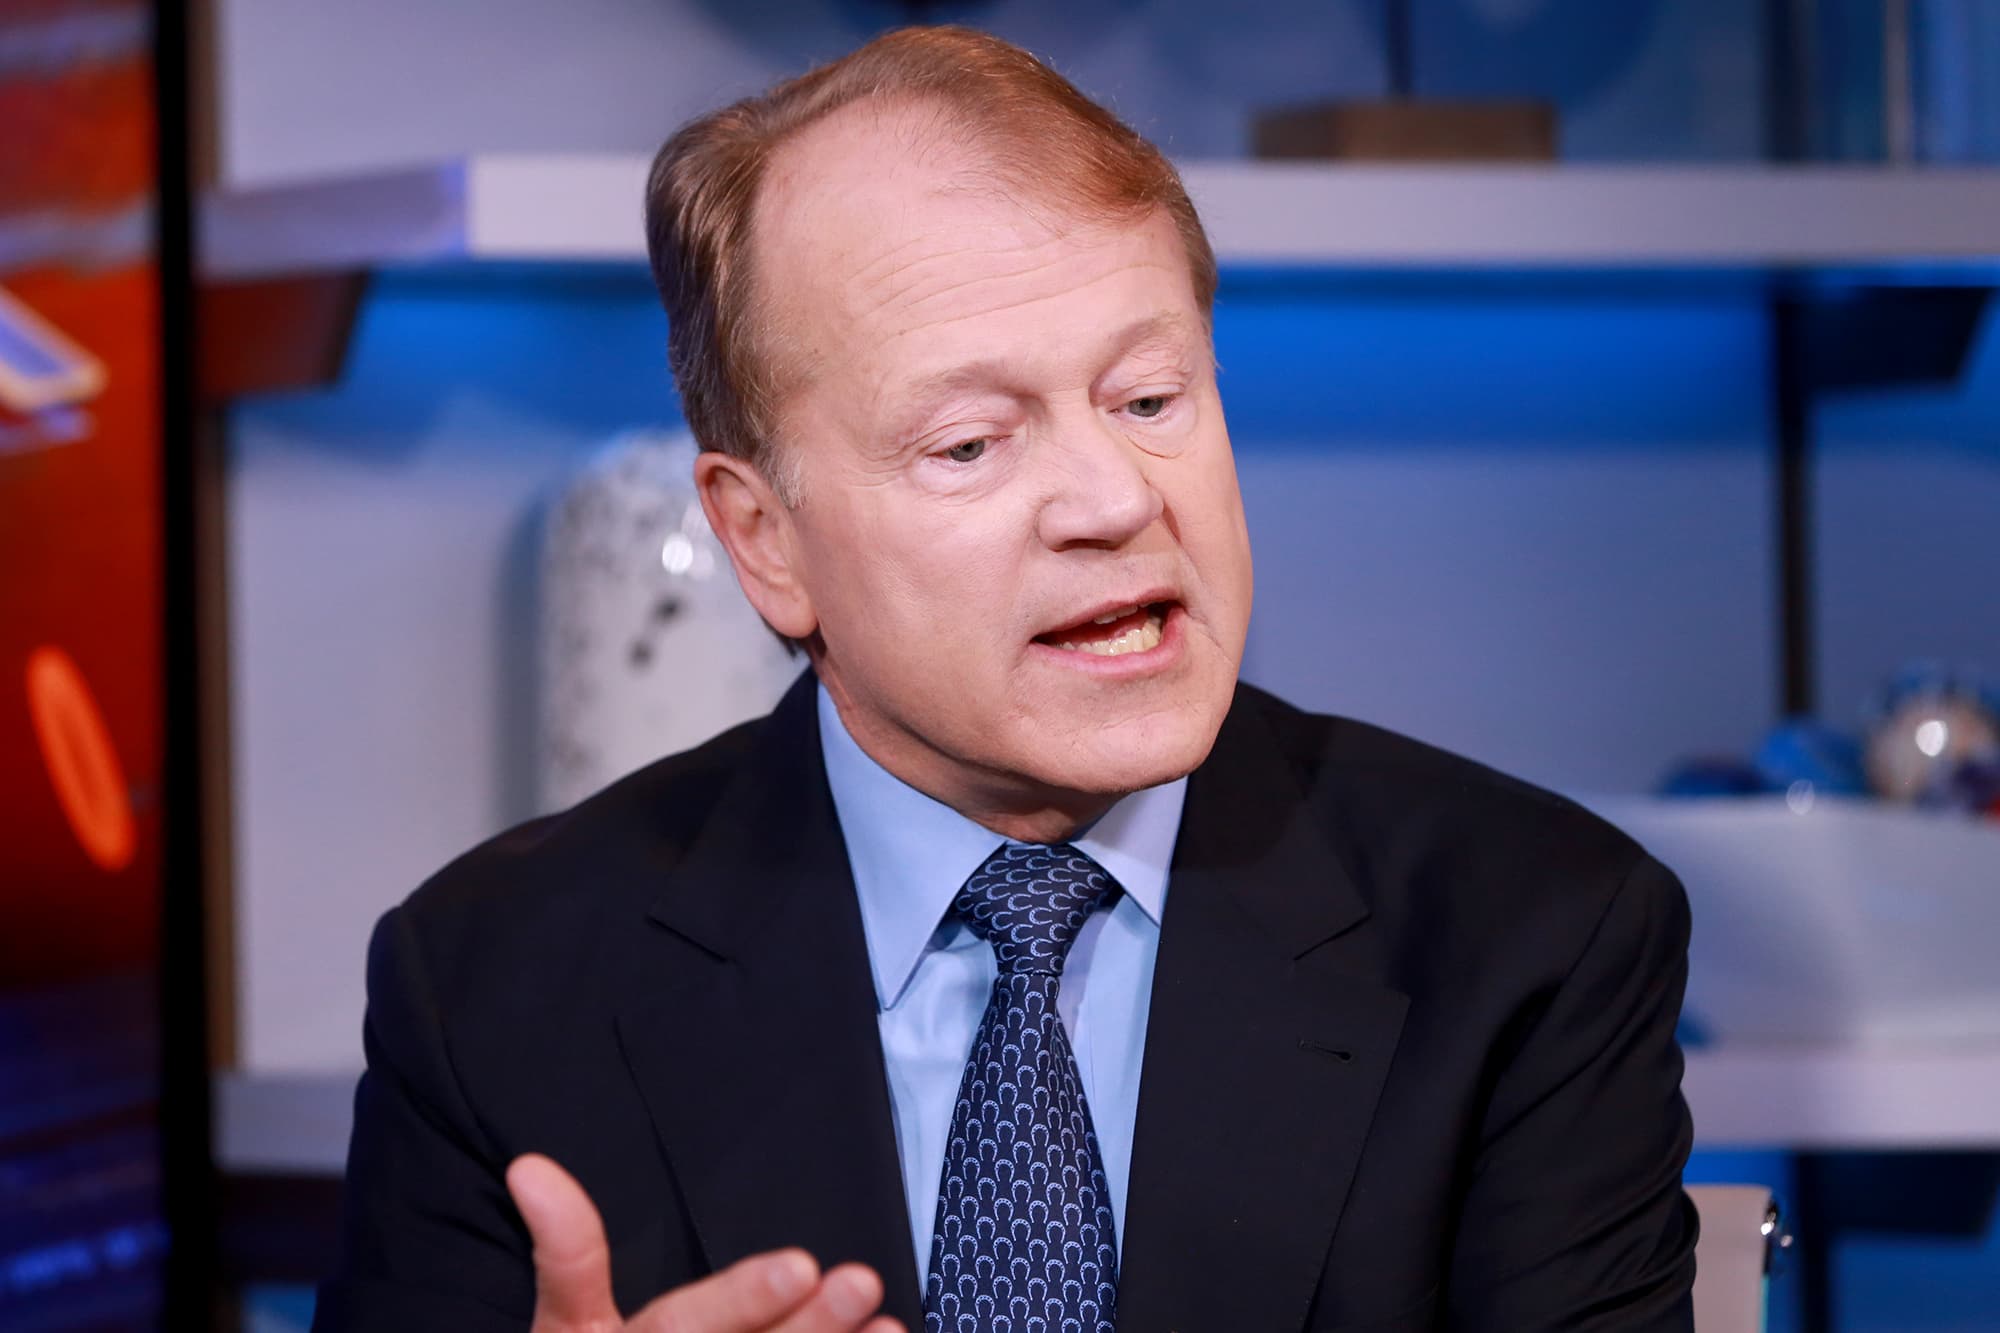 John Chambers says his start-ups are skipping Silicon Valley